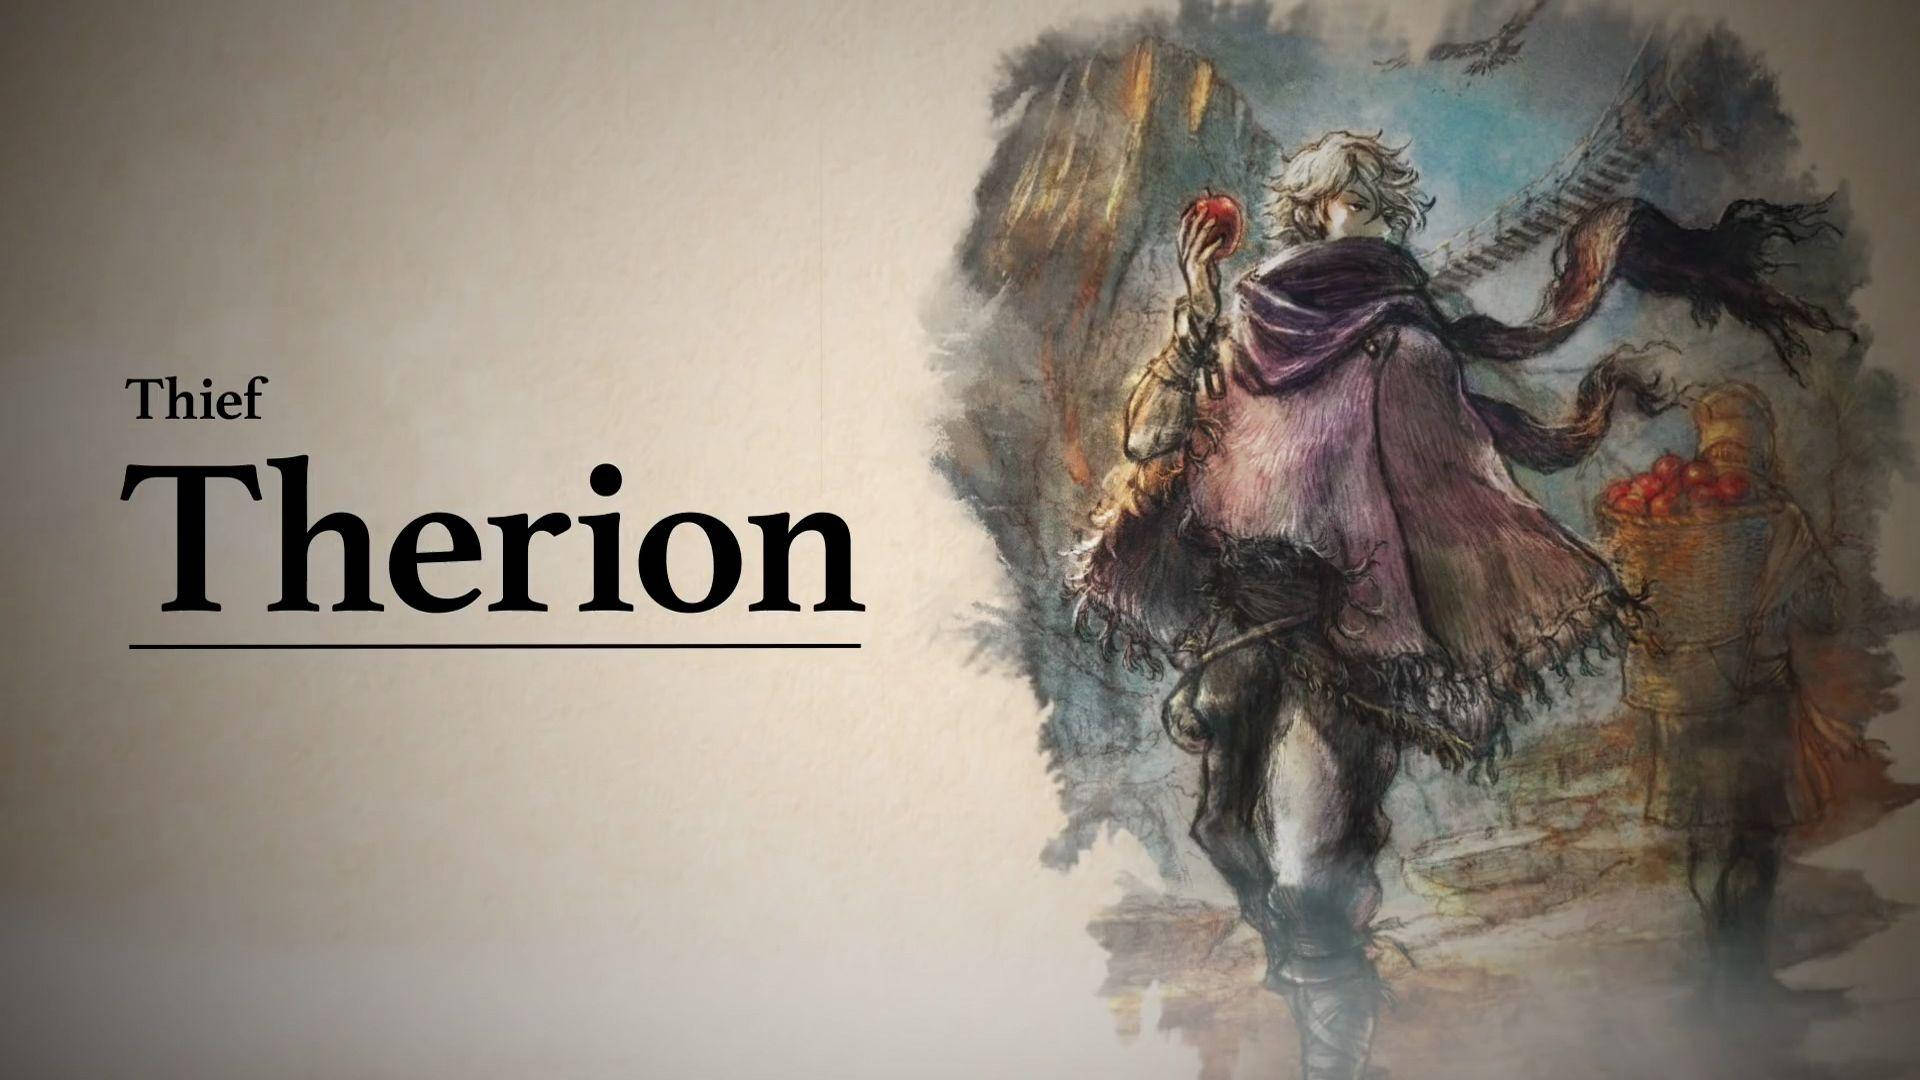 Octopath Traveler Thief Therion Wallpaper